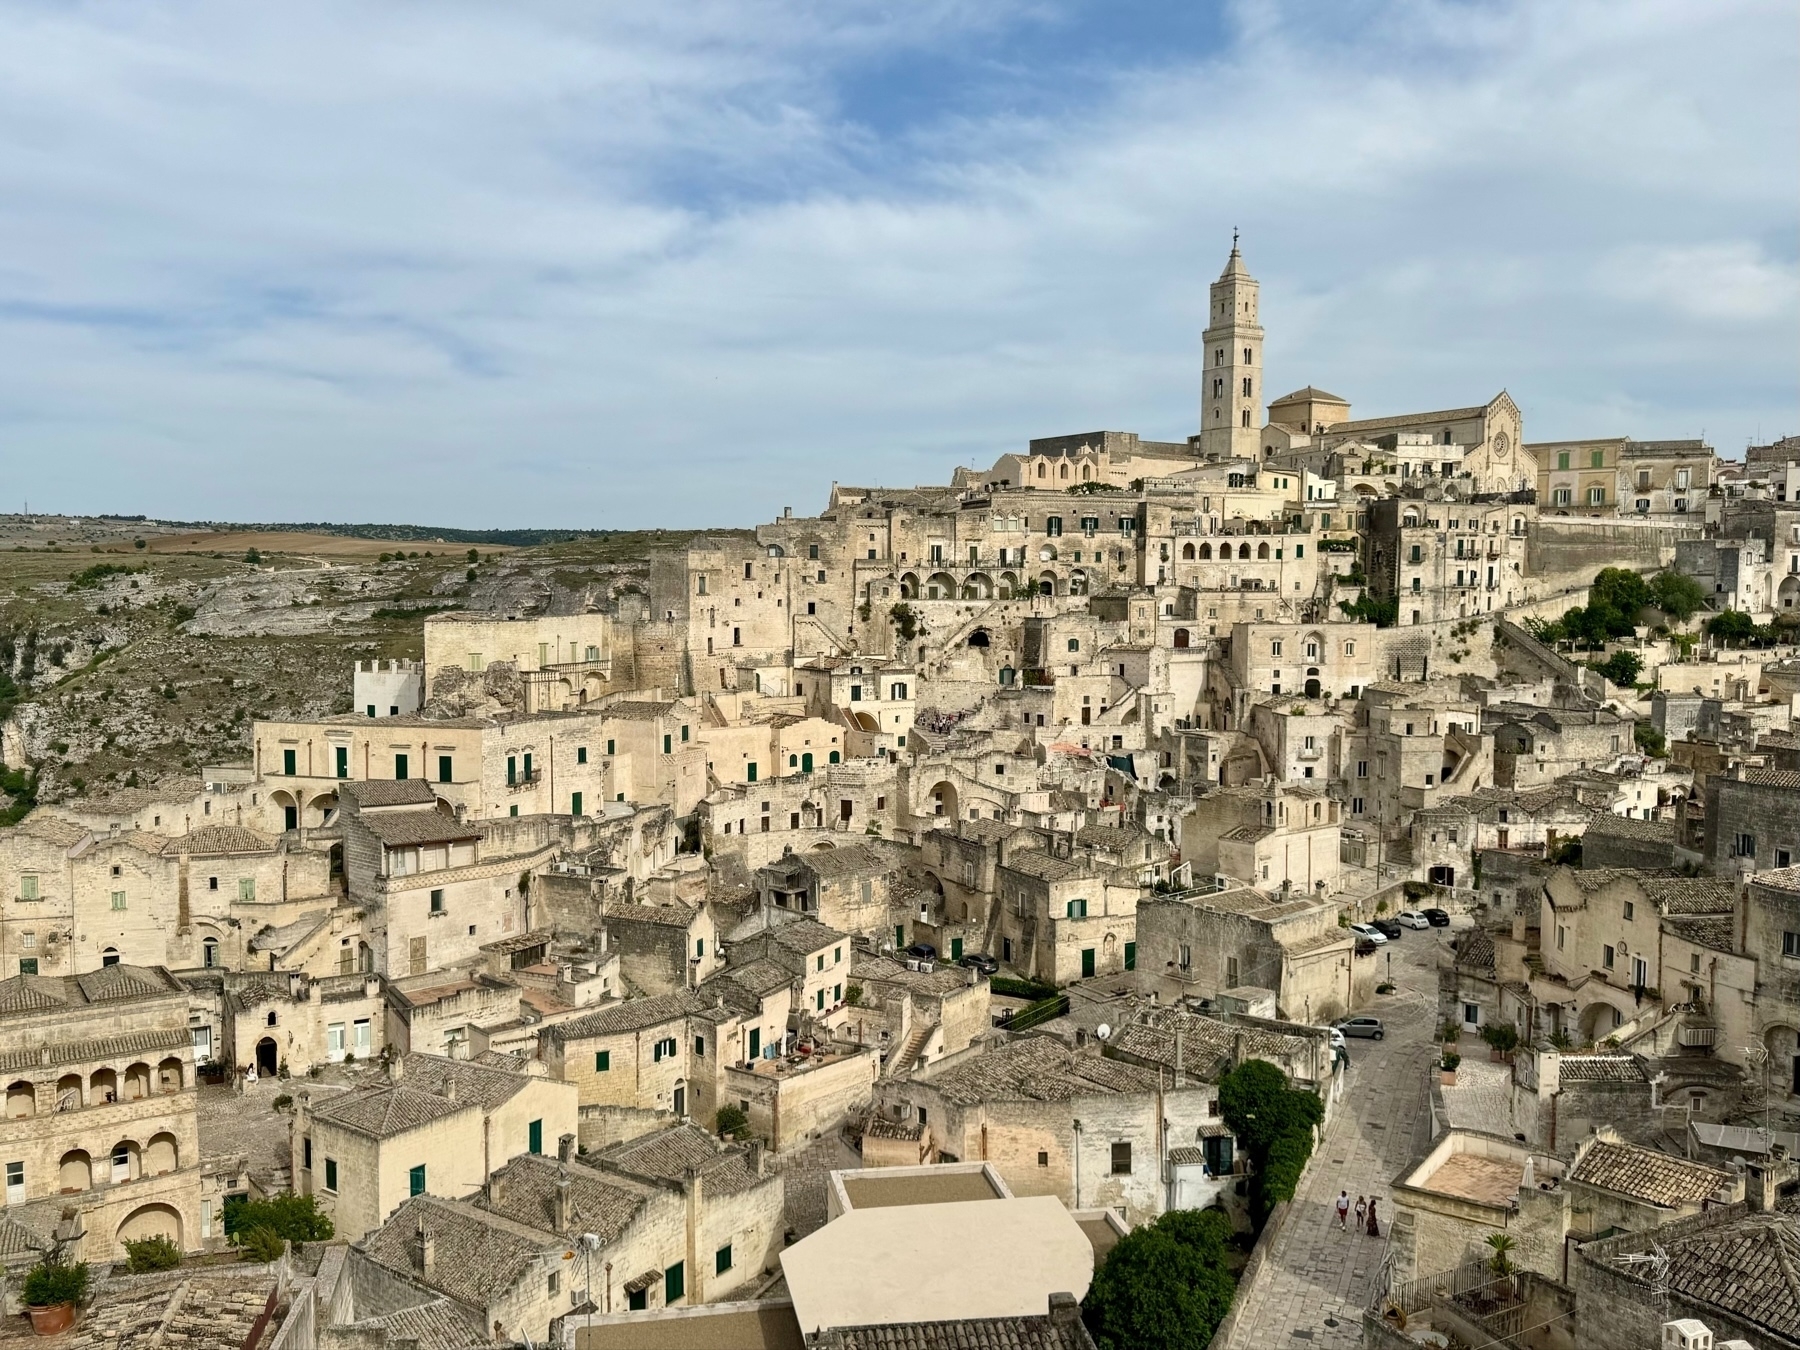 A panoramic view of the historic town of Matera, Italy, featuring ancient stone buildings densely packed on a hillside, winding narrow streets, and a prominent church with a tall bell tower. The landscape around the town consists of rocky terrain and sparse vegetation.